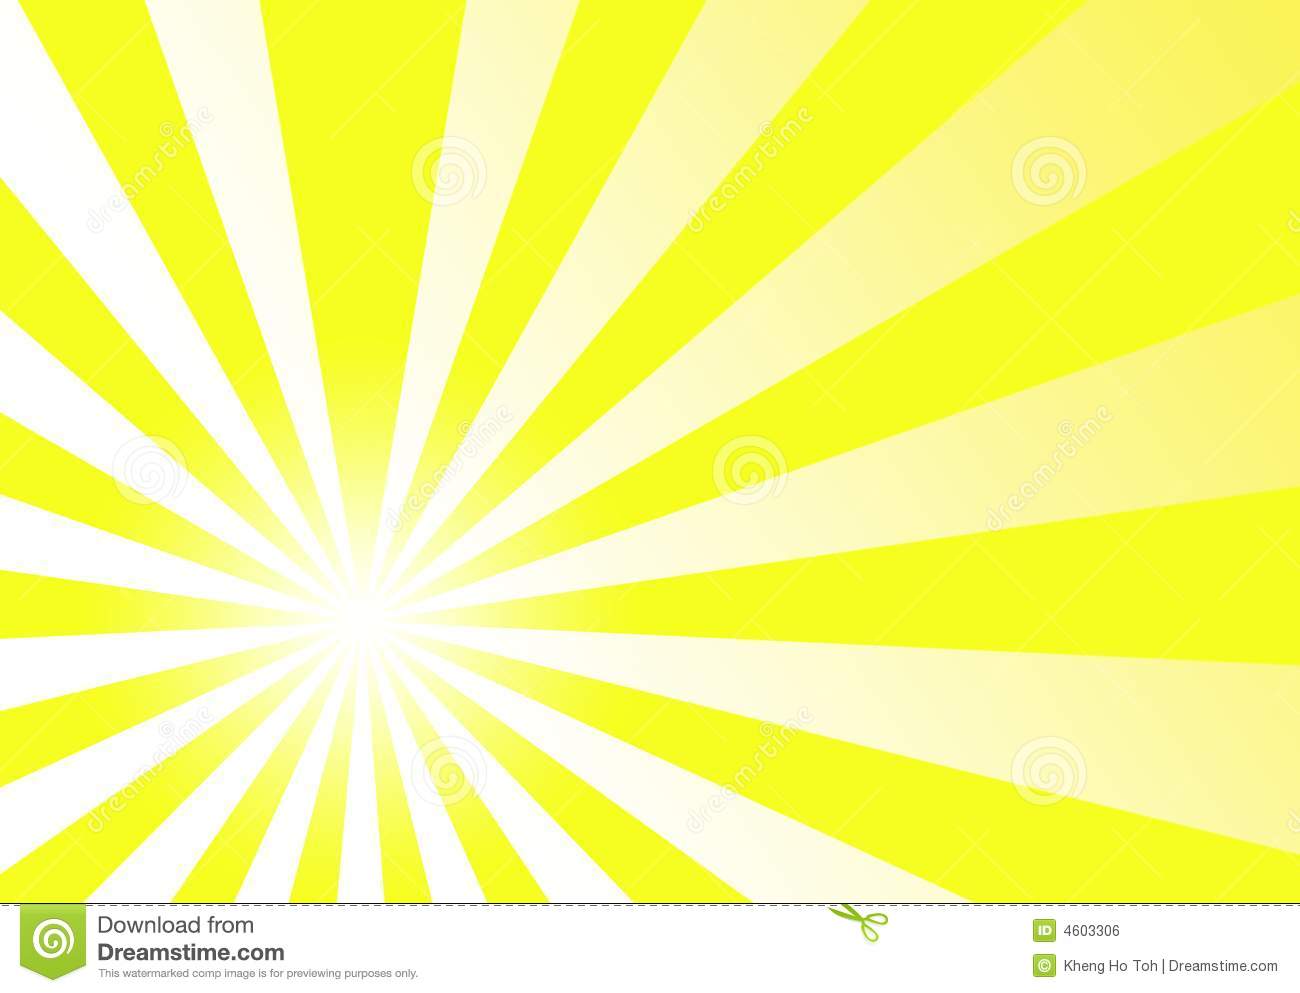 Blue and yellow background clipart 